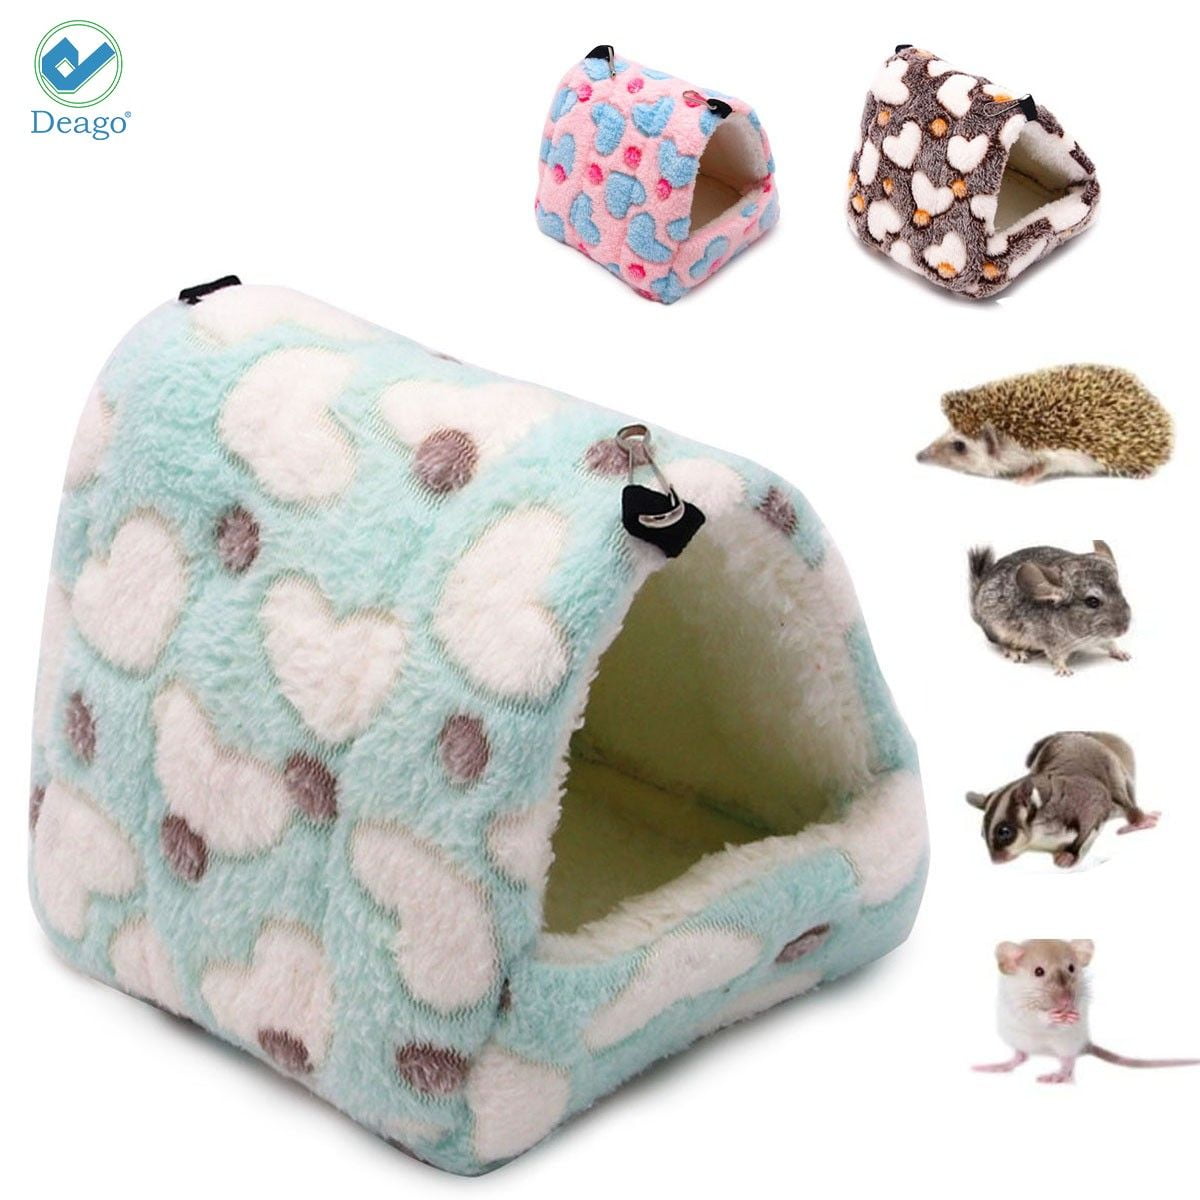 Squirrel Guinea Pig Warm Bed For Hamsters/Guinea Pigs/Hedgehogs/Rats/Chinchillas/Rabbits/Parrots For Winter Warmth Parrot Pet Sleeping Bag Honey Bag Warm Hammock